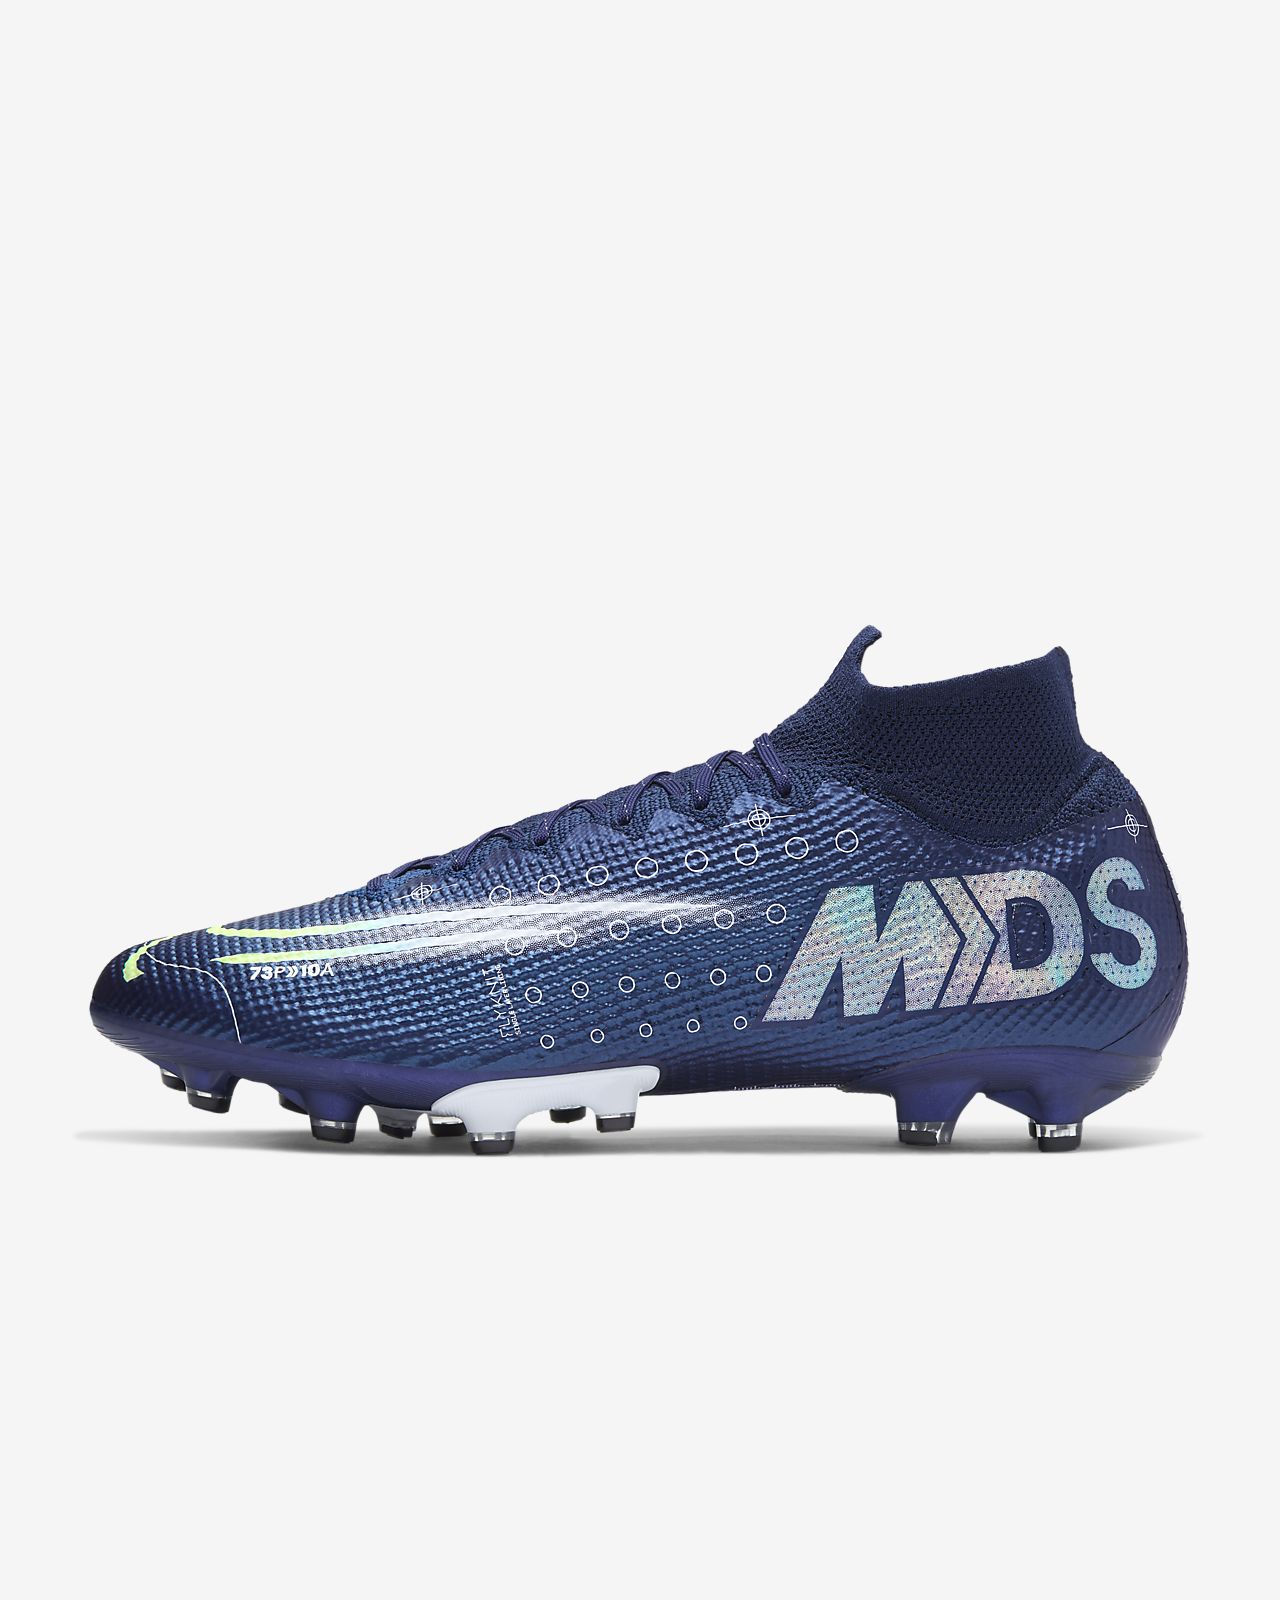 Nike Mercurial Superfly 7 Elite Mds Ag Pro Artificial Grass